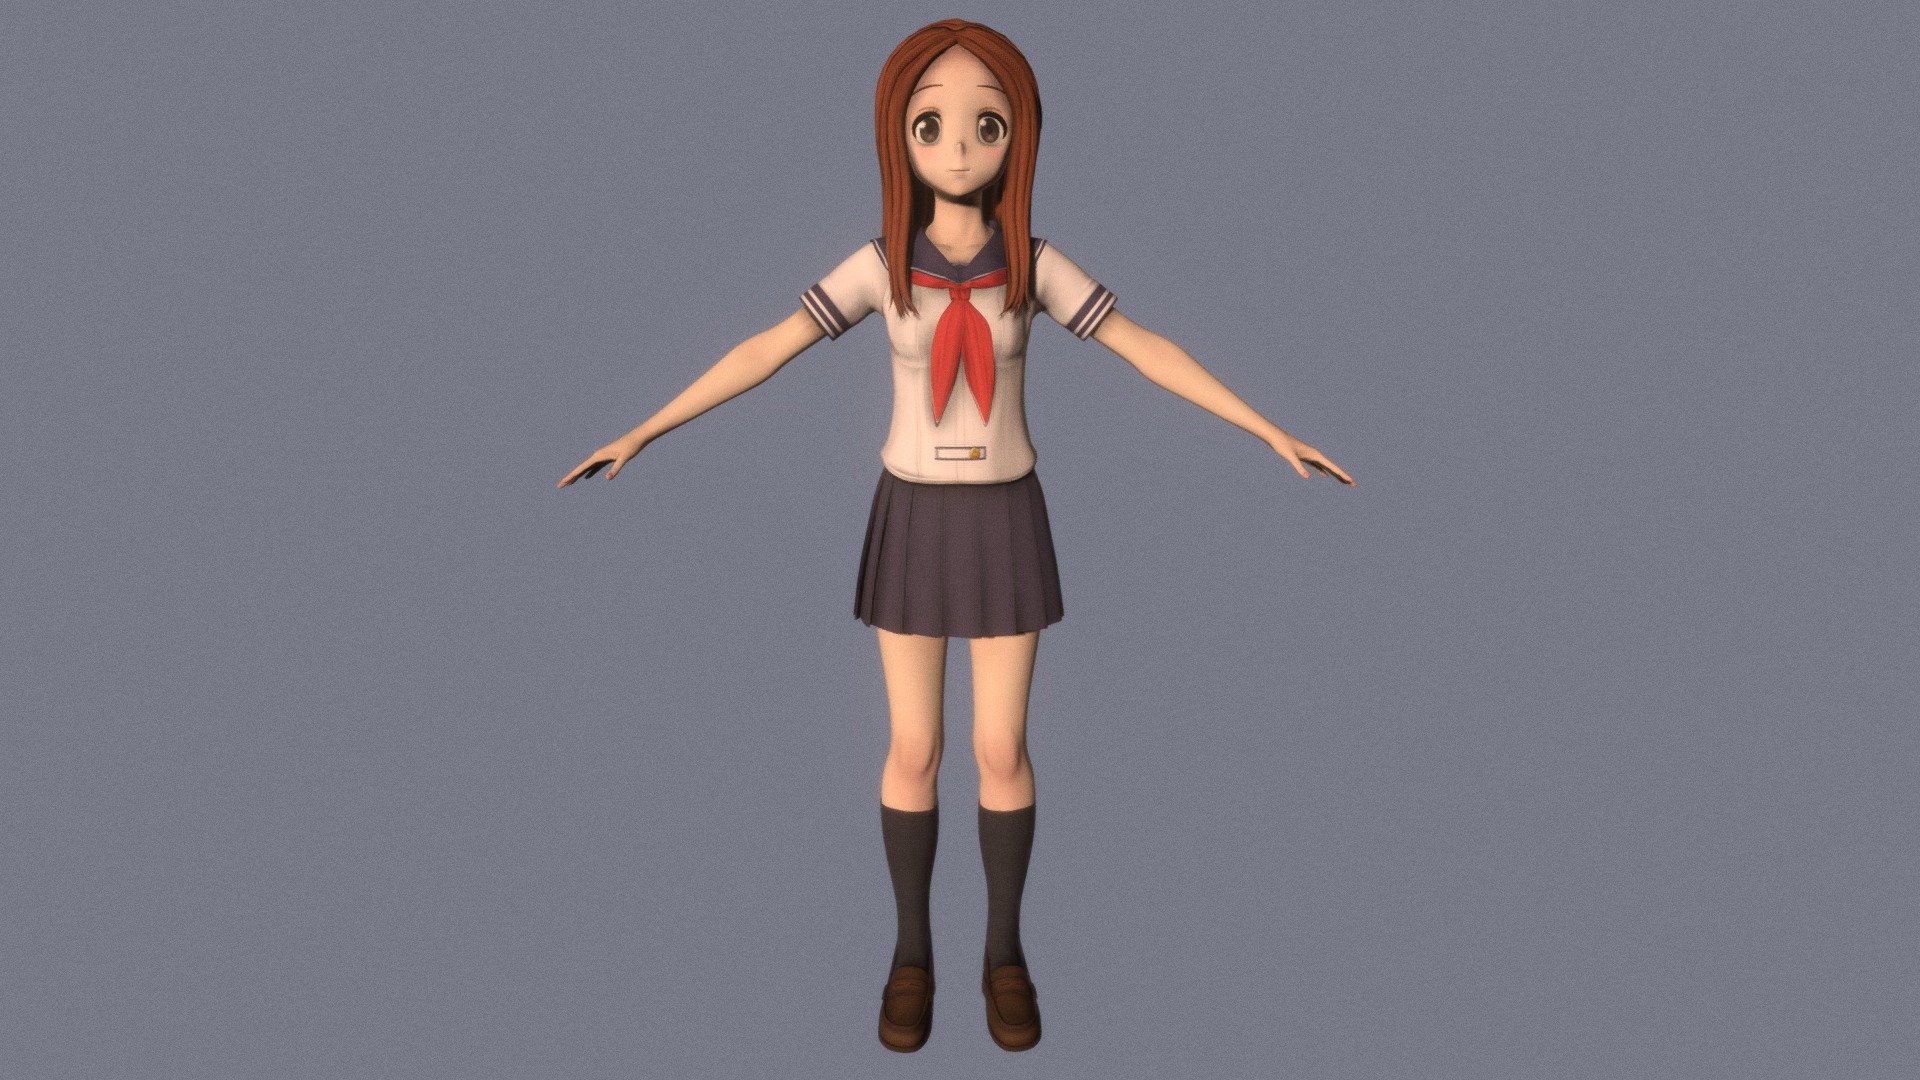 T-pose rigged model of anime girl Takagi-san (Karakai Jouzu no Takagi-san).

Body and clothings are rigged and skinned by 3ds Max CAT system.

Eye direction and facial animation controlled by Morpher modifier / Shape Keys / Blendshape.

This product include .FBX (ver. 7200) and .MAX (ver. 2010) files.

3ds Max version is turbosmoothed to give a high quality render (as you can see here).

Original main body mesh have ~7.000 polys.

This 3D model may need some tweaking to adapt the rig system to games engine and other platforms.

I support convert model to various file formats (the rig data will be lost in this process): 3DS; AI; ASE; DAE; DWF; DWG; DXF; FLT; HTR; IGS; M3G; MQO; OBJ; SAT; STL; W3D; WRL; X.

You can buy all of my models in one pack to save cost: https://sketchfab.com/3d-models/all-of-my-anime-girls-c5a56156994e4193b9e8fa21a3b8360b

And I can make commission models.

If you have any questions, please leave a comment or contact me via my email 3d.eden.project@gmail.com 3d model